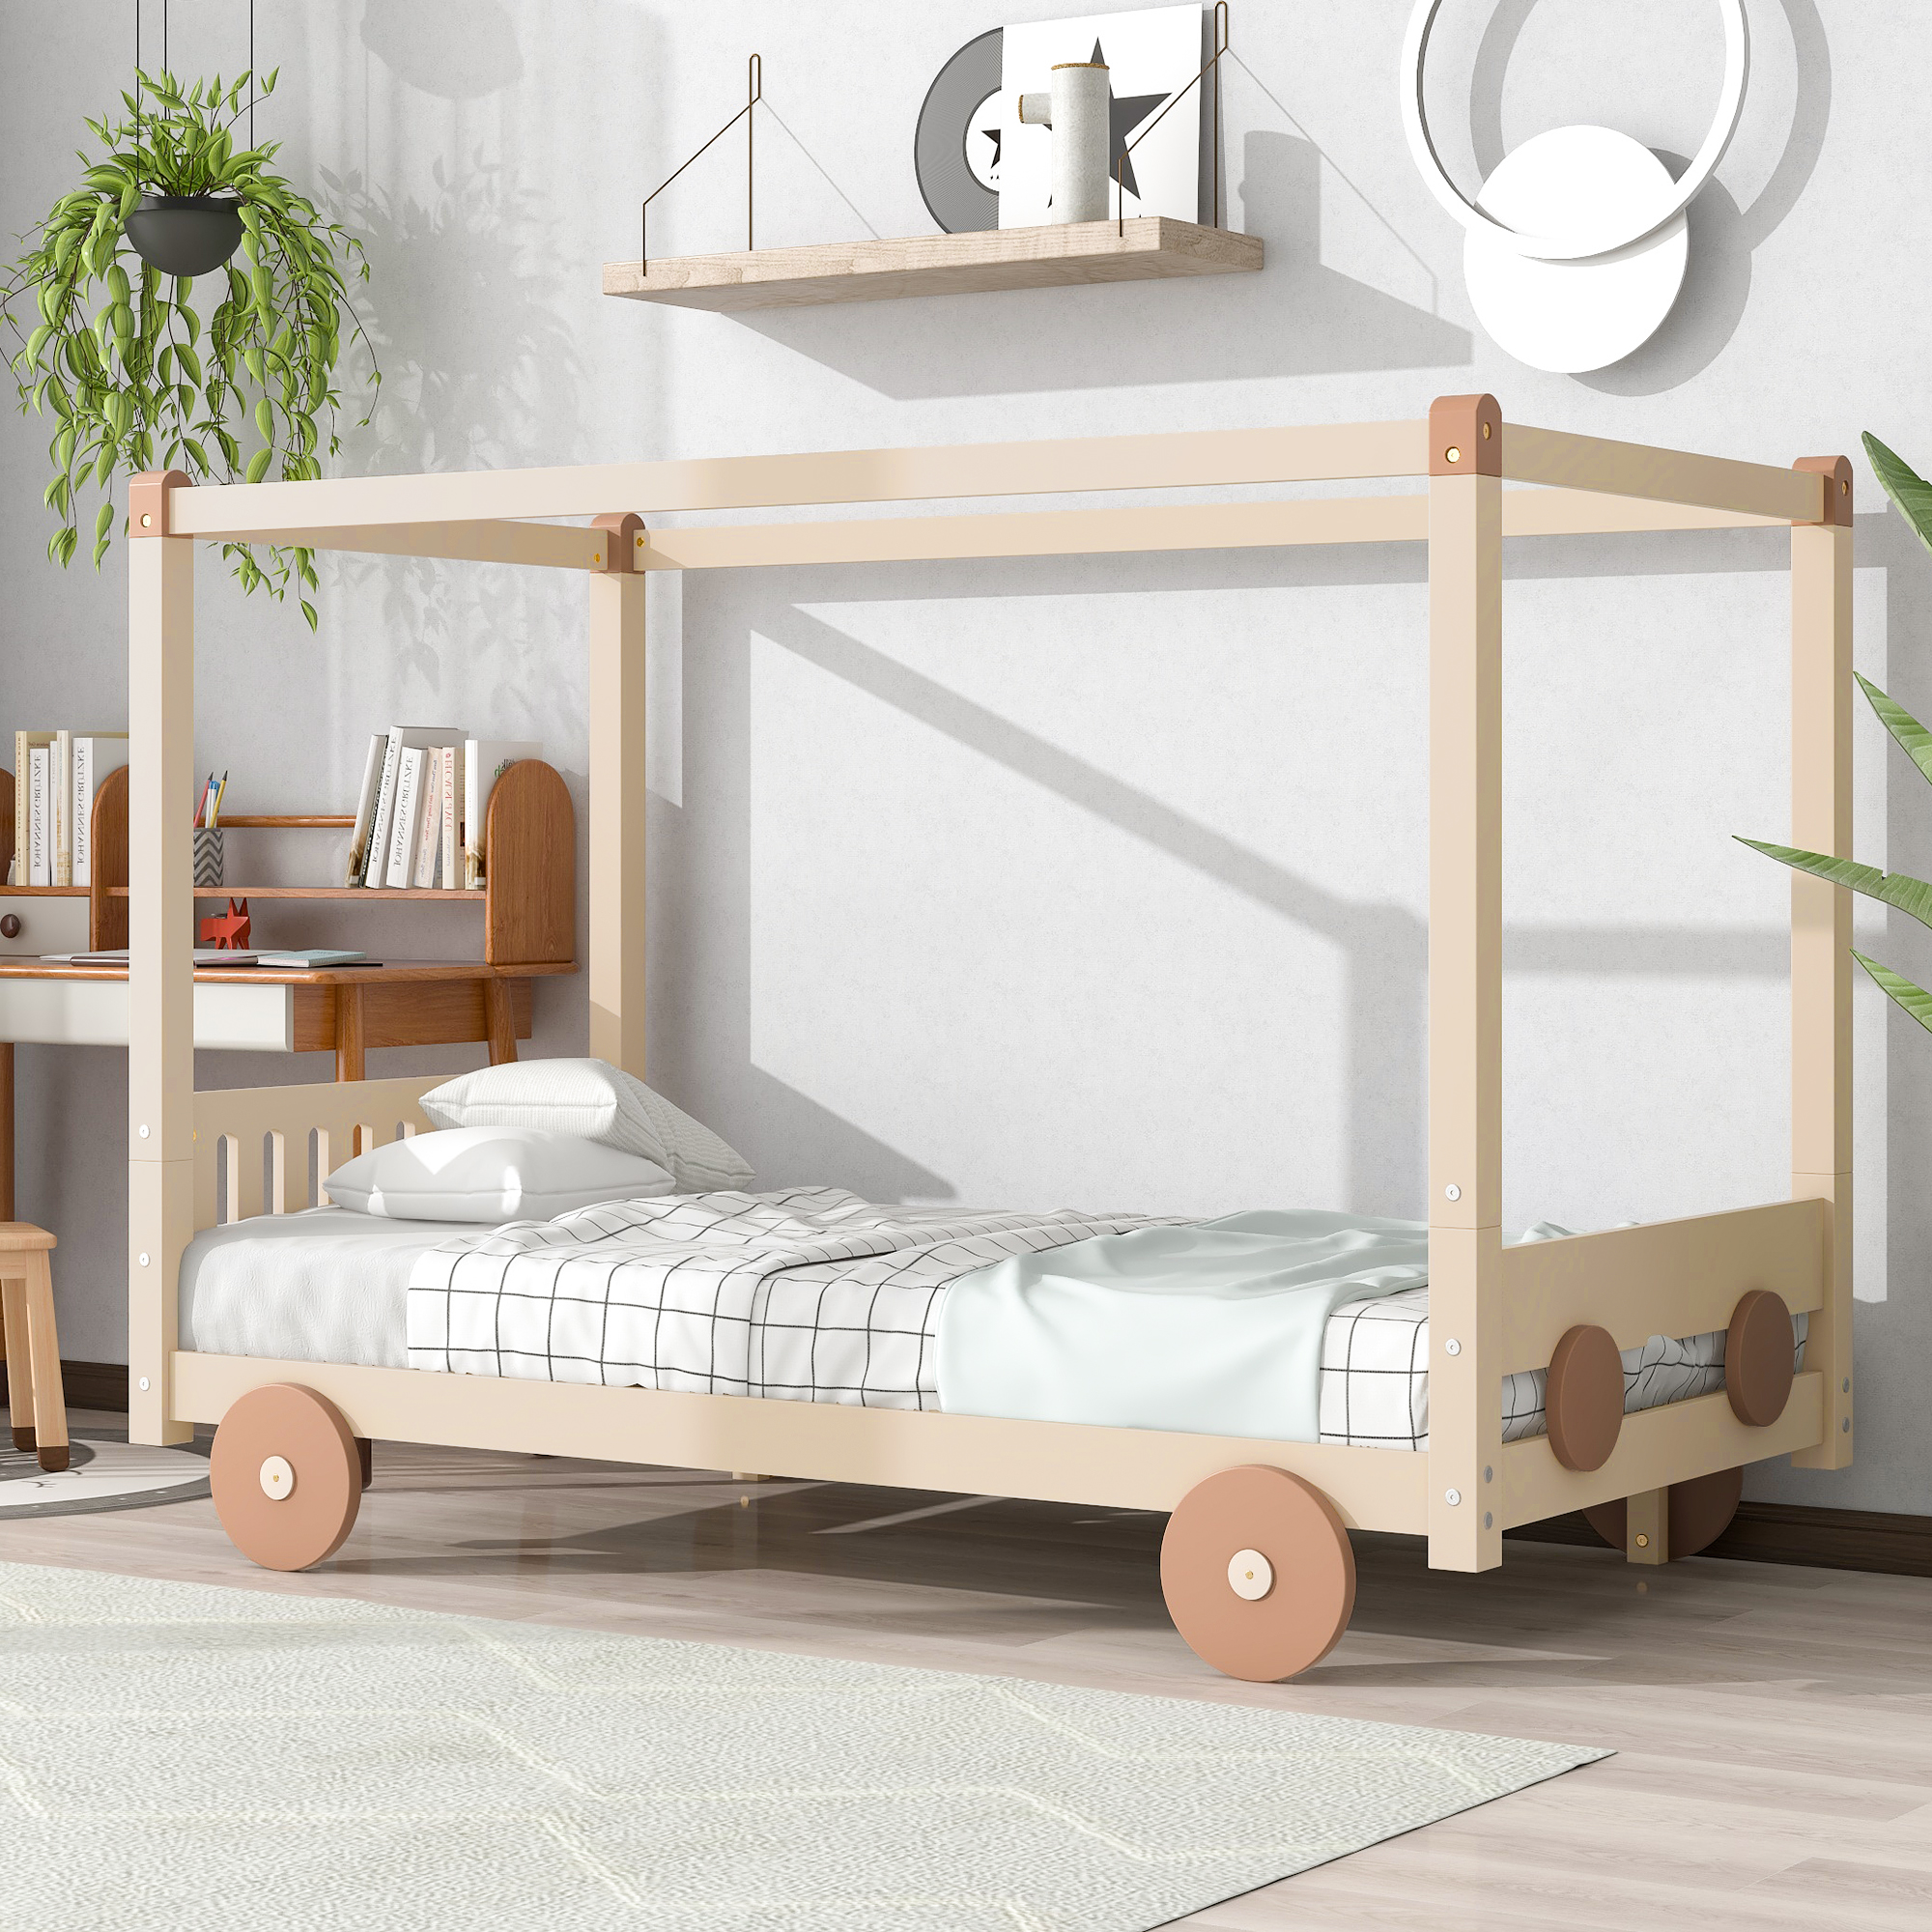 Artlia Twin Size Canopy Car-Shaped Platform Bed,Natural+Brown - image 1 of 7